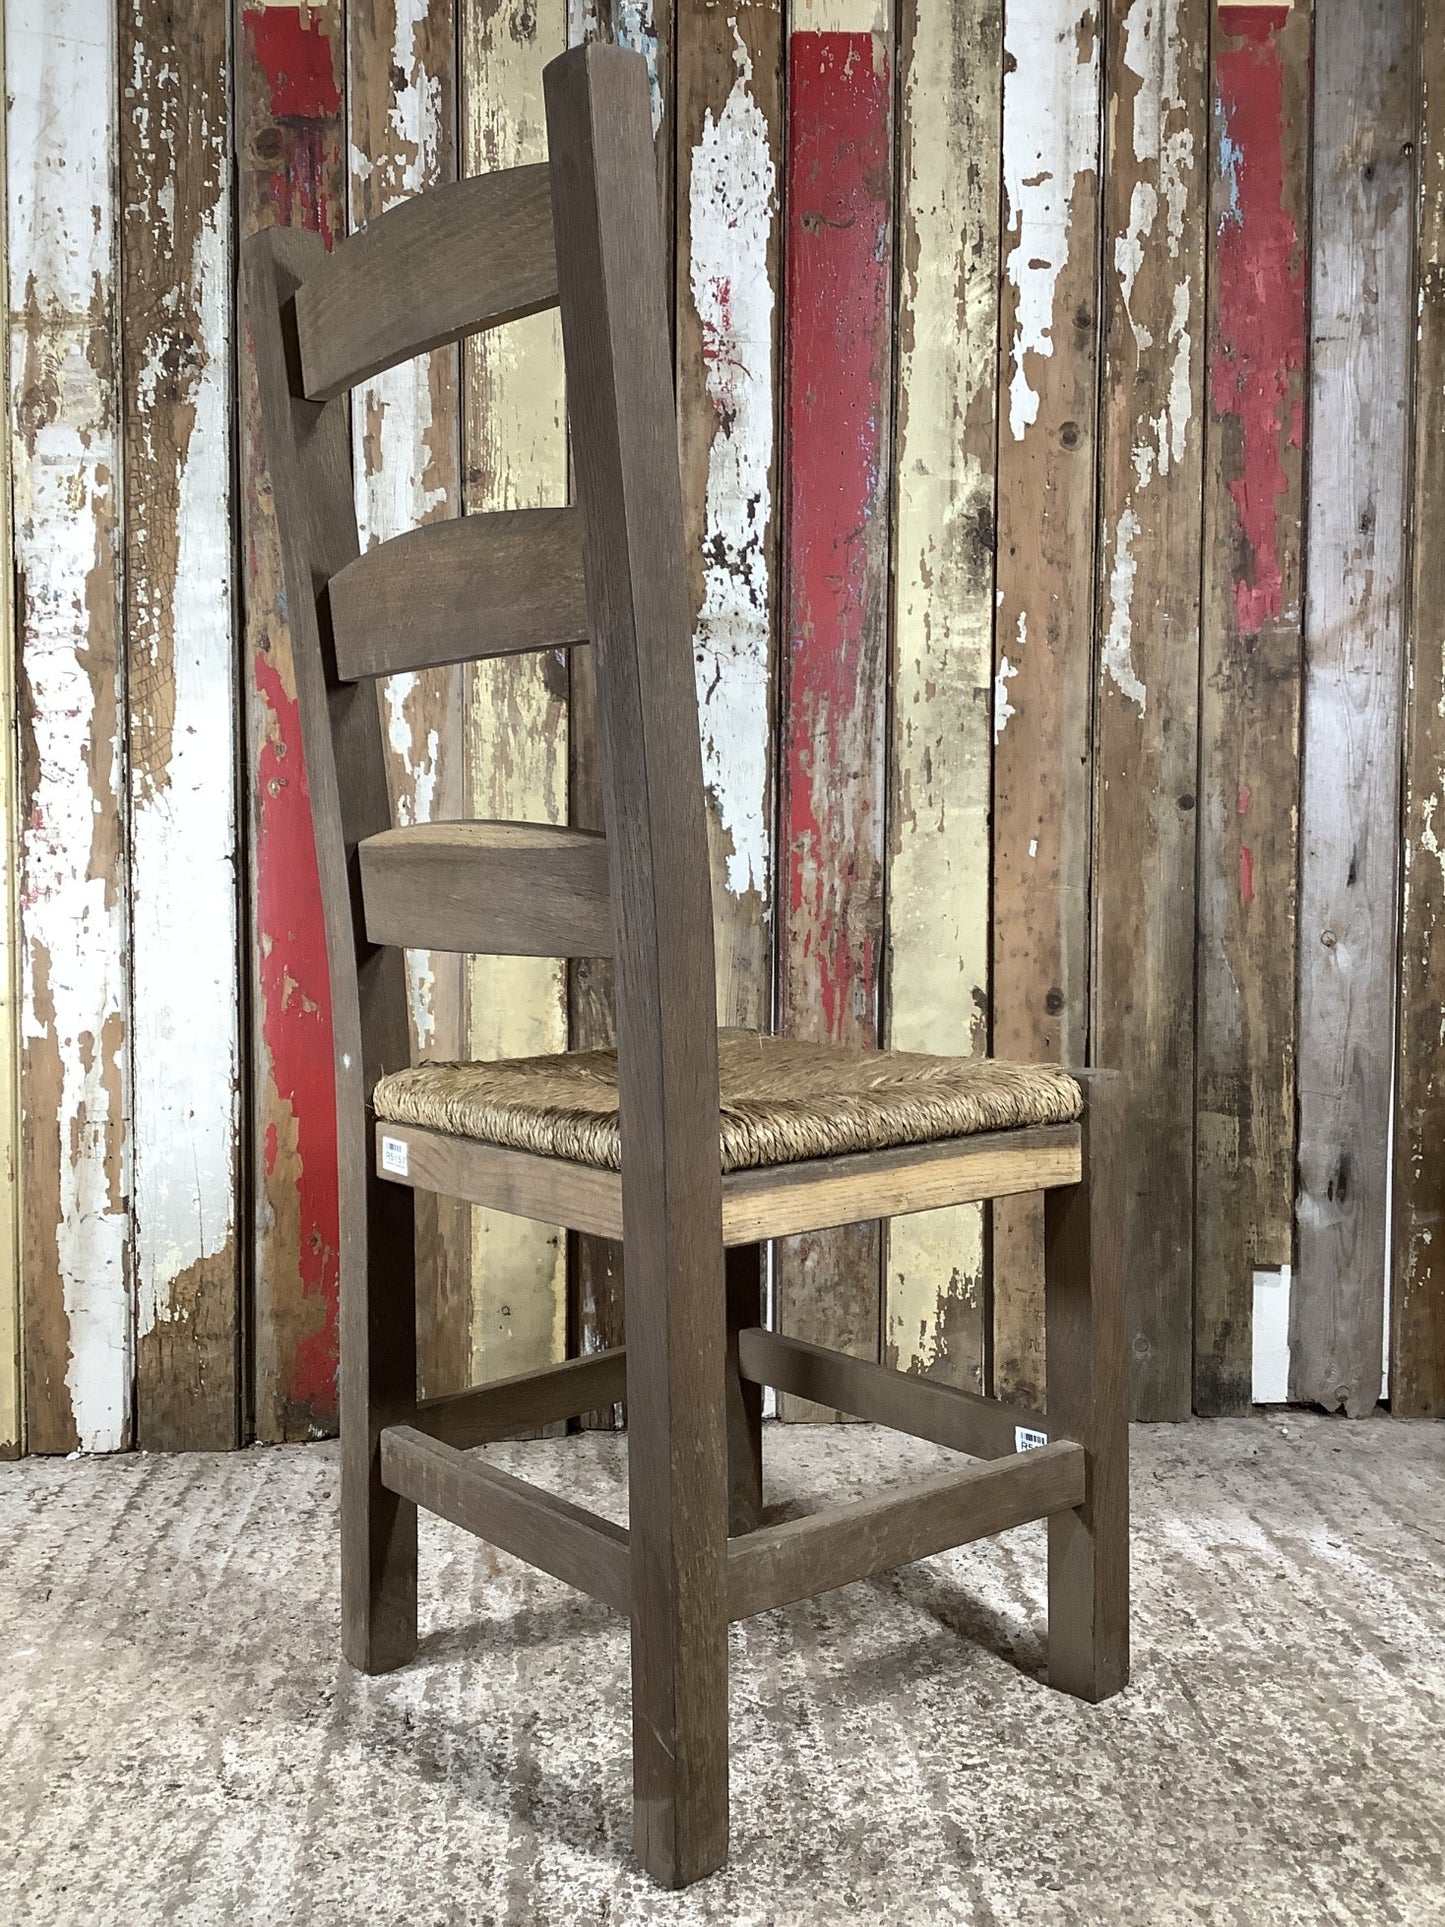 Solid Stained Oak Shaker Style Back Kitchen Dining Room Chair Sea Grass Seat